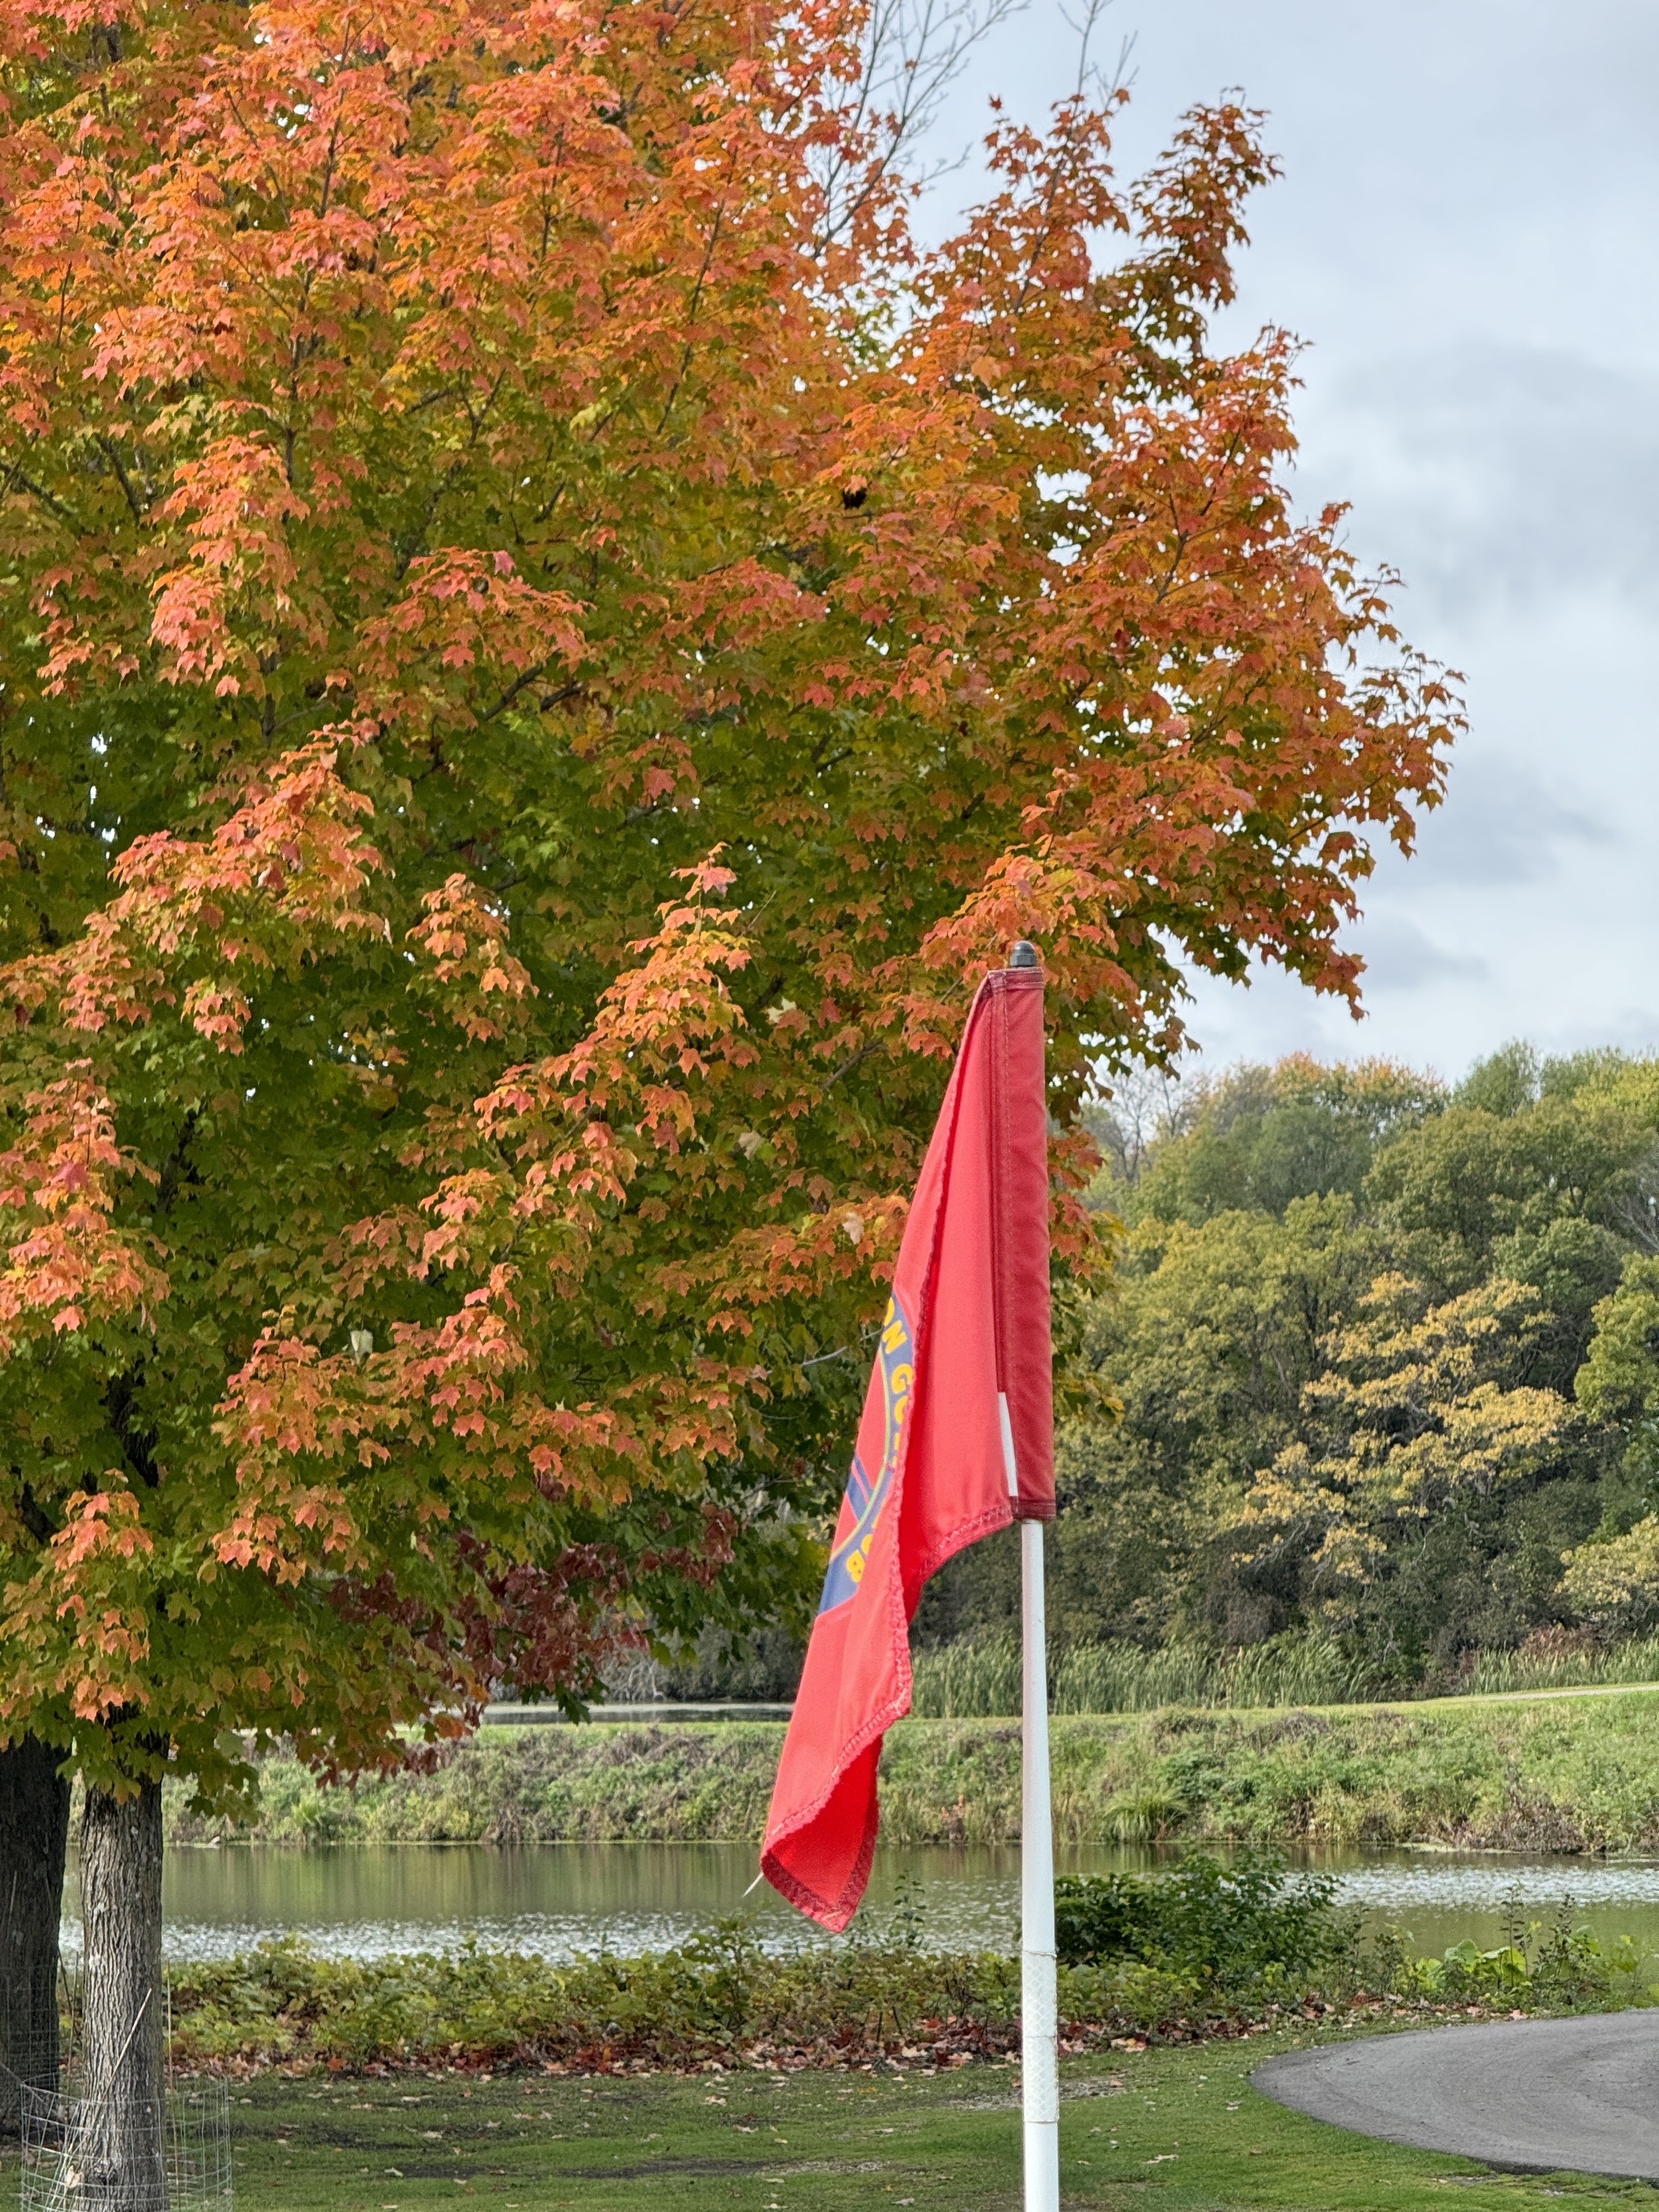 Flag stick at Cannon Golf Club in front of a tree in full fall colors